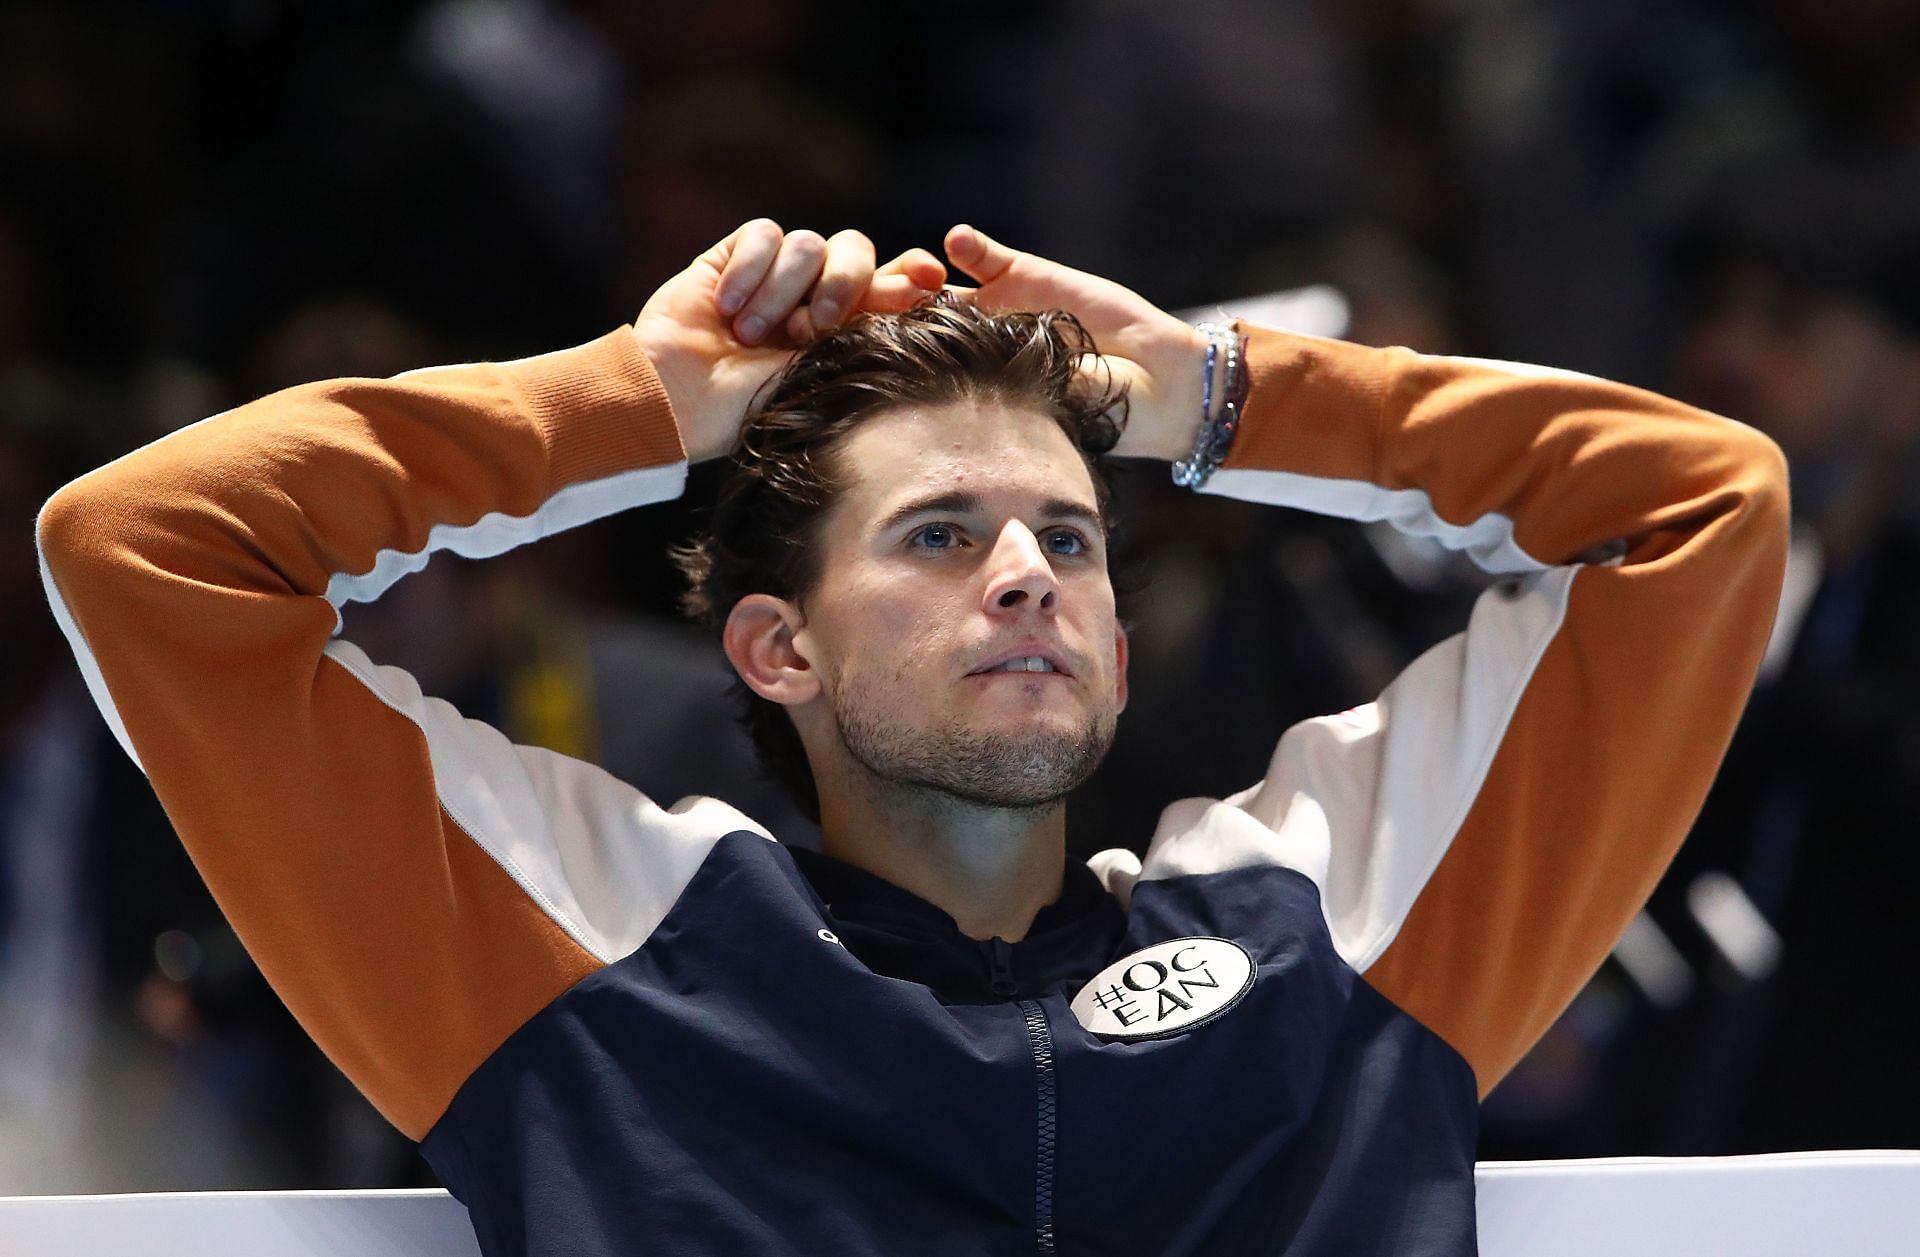 Dominic Thiem pictured at the Nitto ATP Finals.